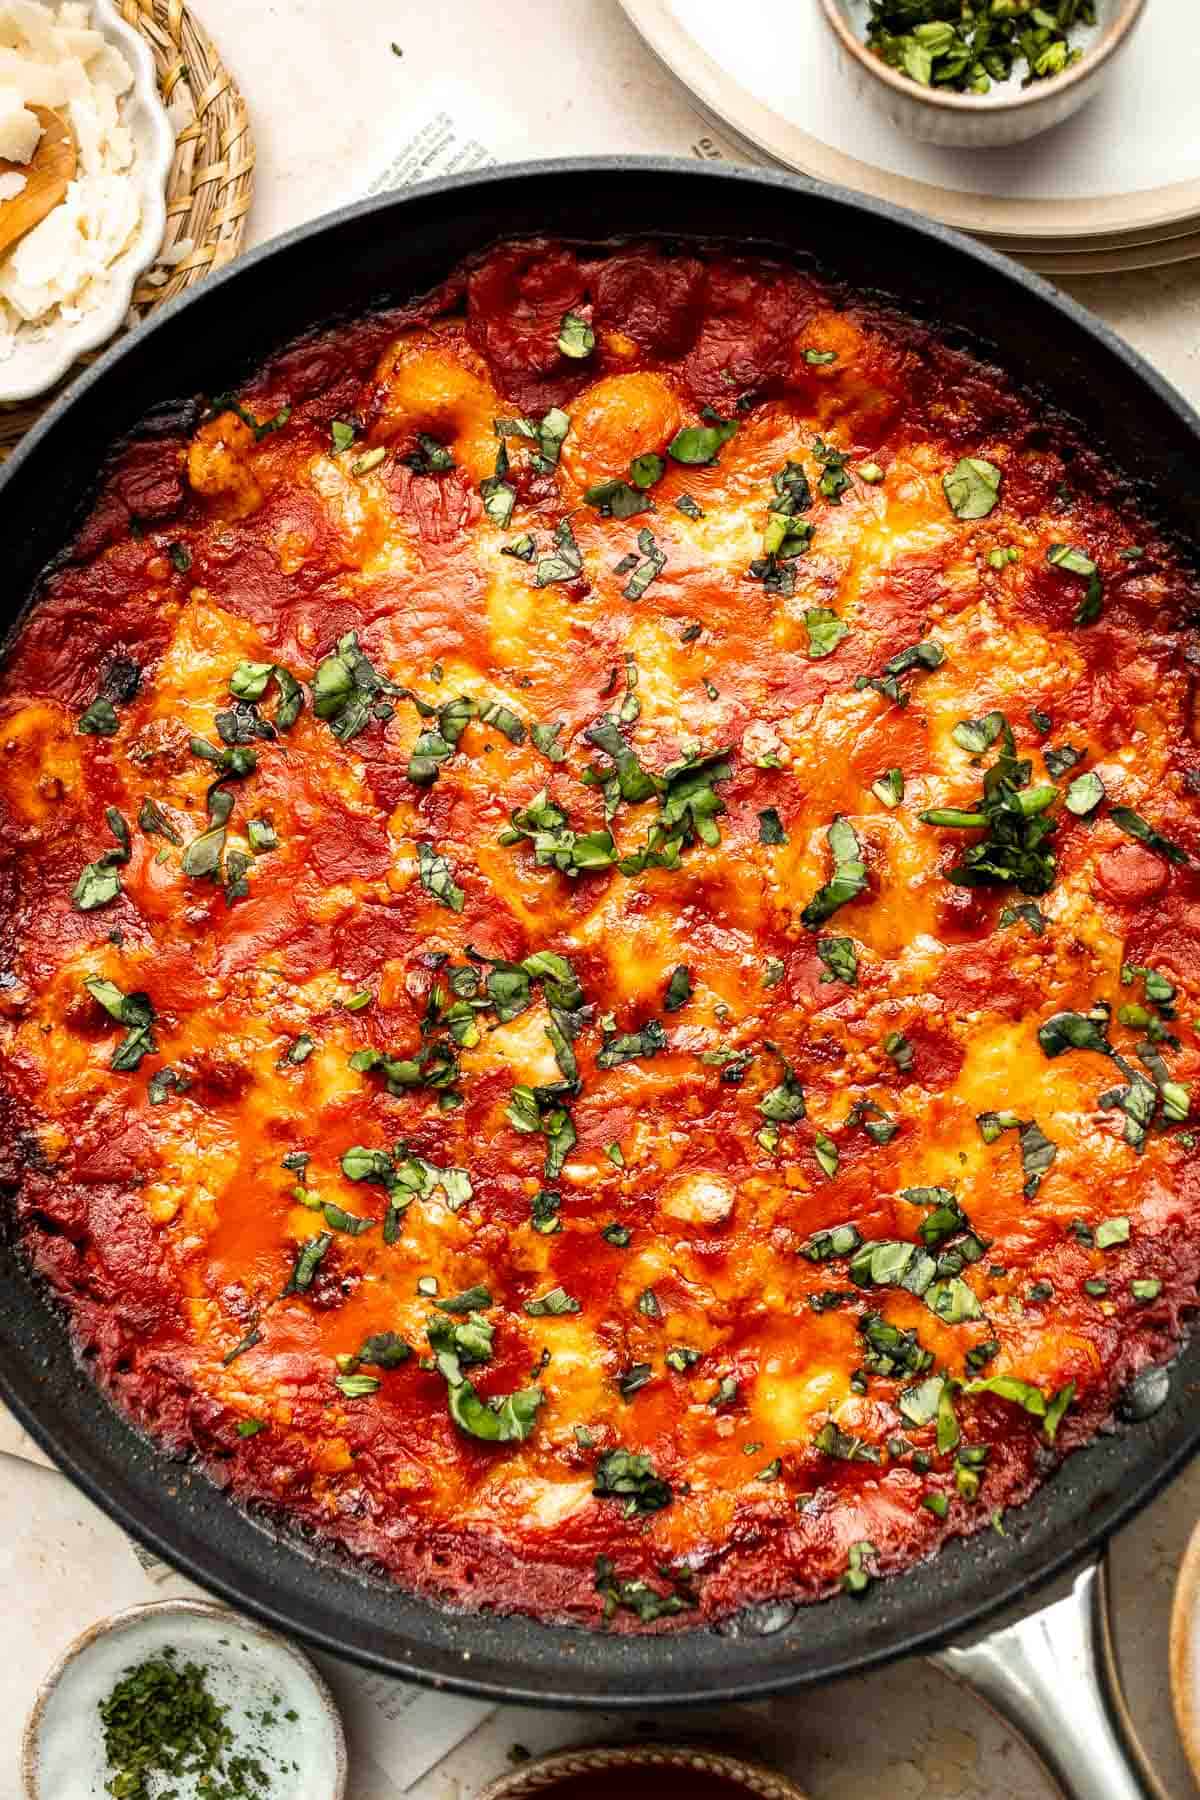 Cheesy Baked Gnocchi is quick and easy comfort food made all in one pot with chewy bites of gnocchi, a simple tomato-based sauce, and gooey melty cheese. | aheadofthyme.com